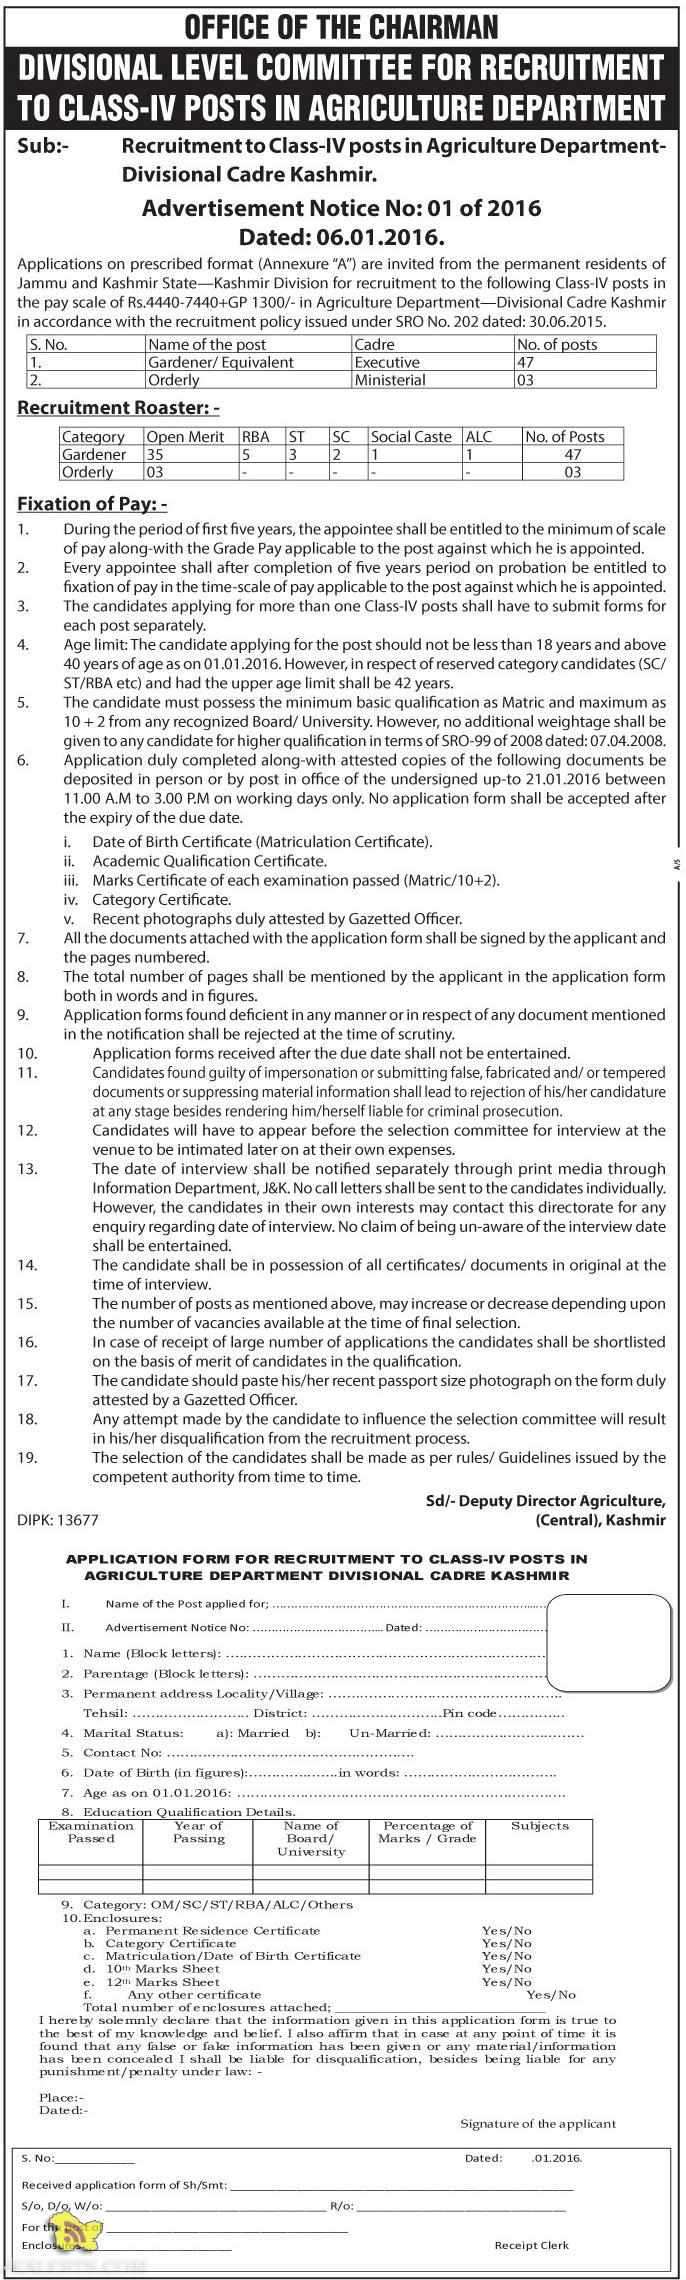 Recruitment to Class-IV posts in Agriculture Department